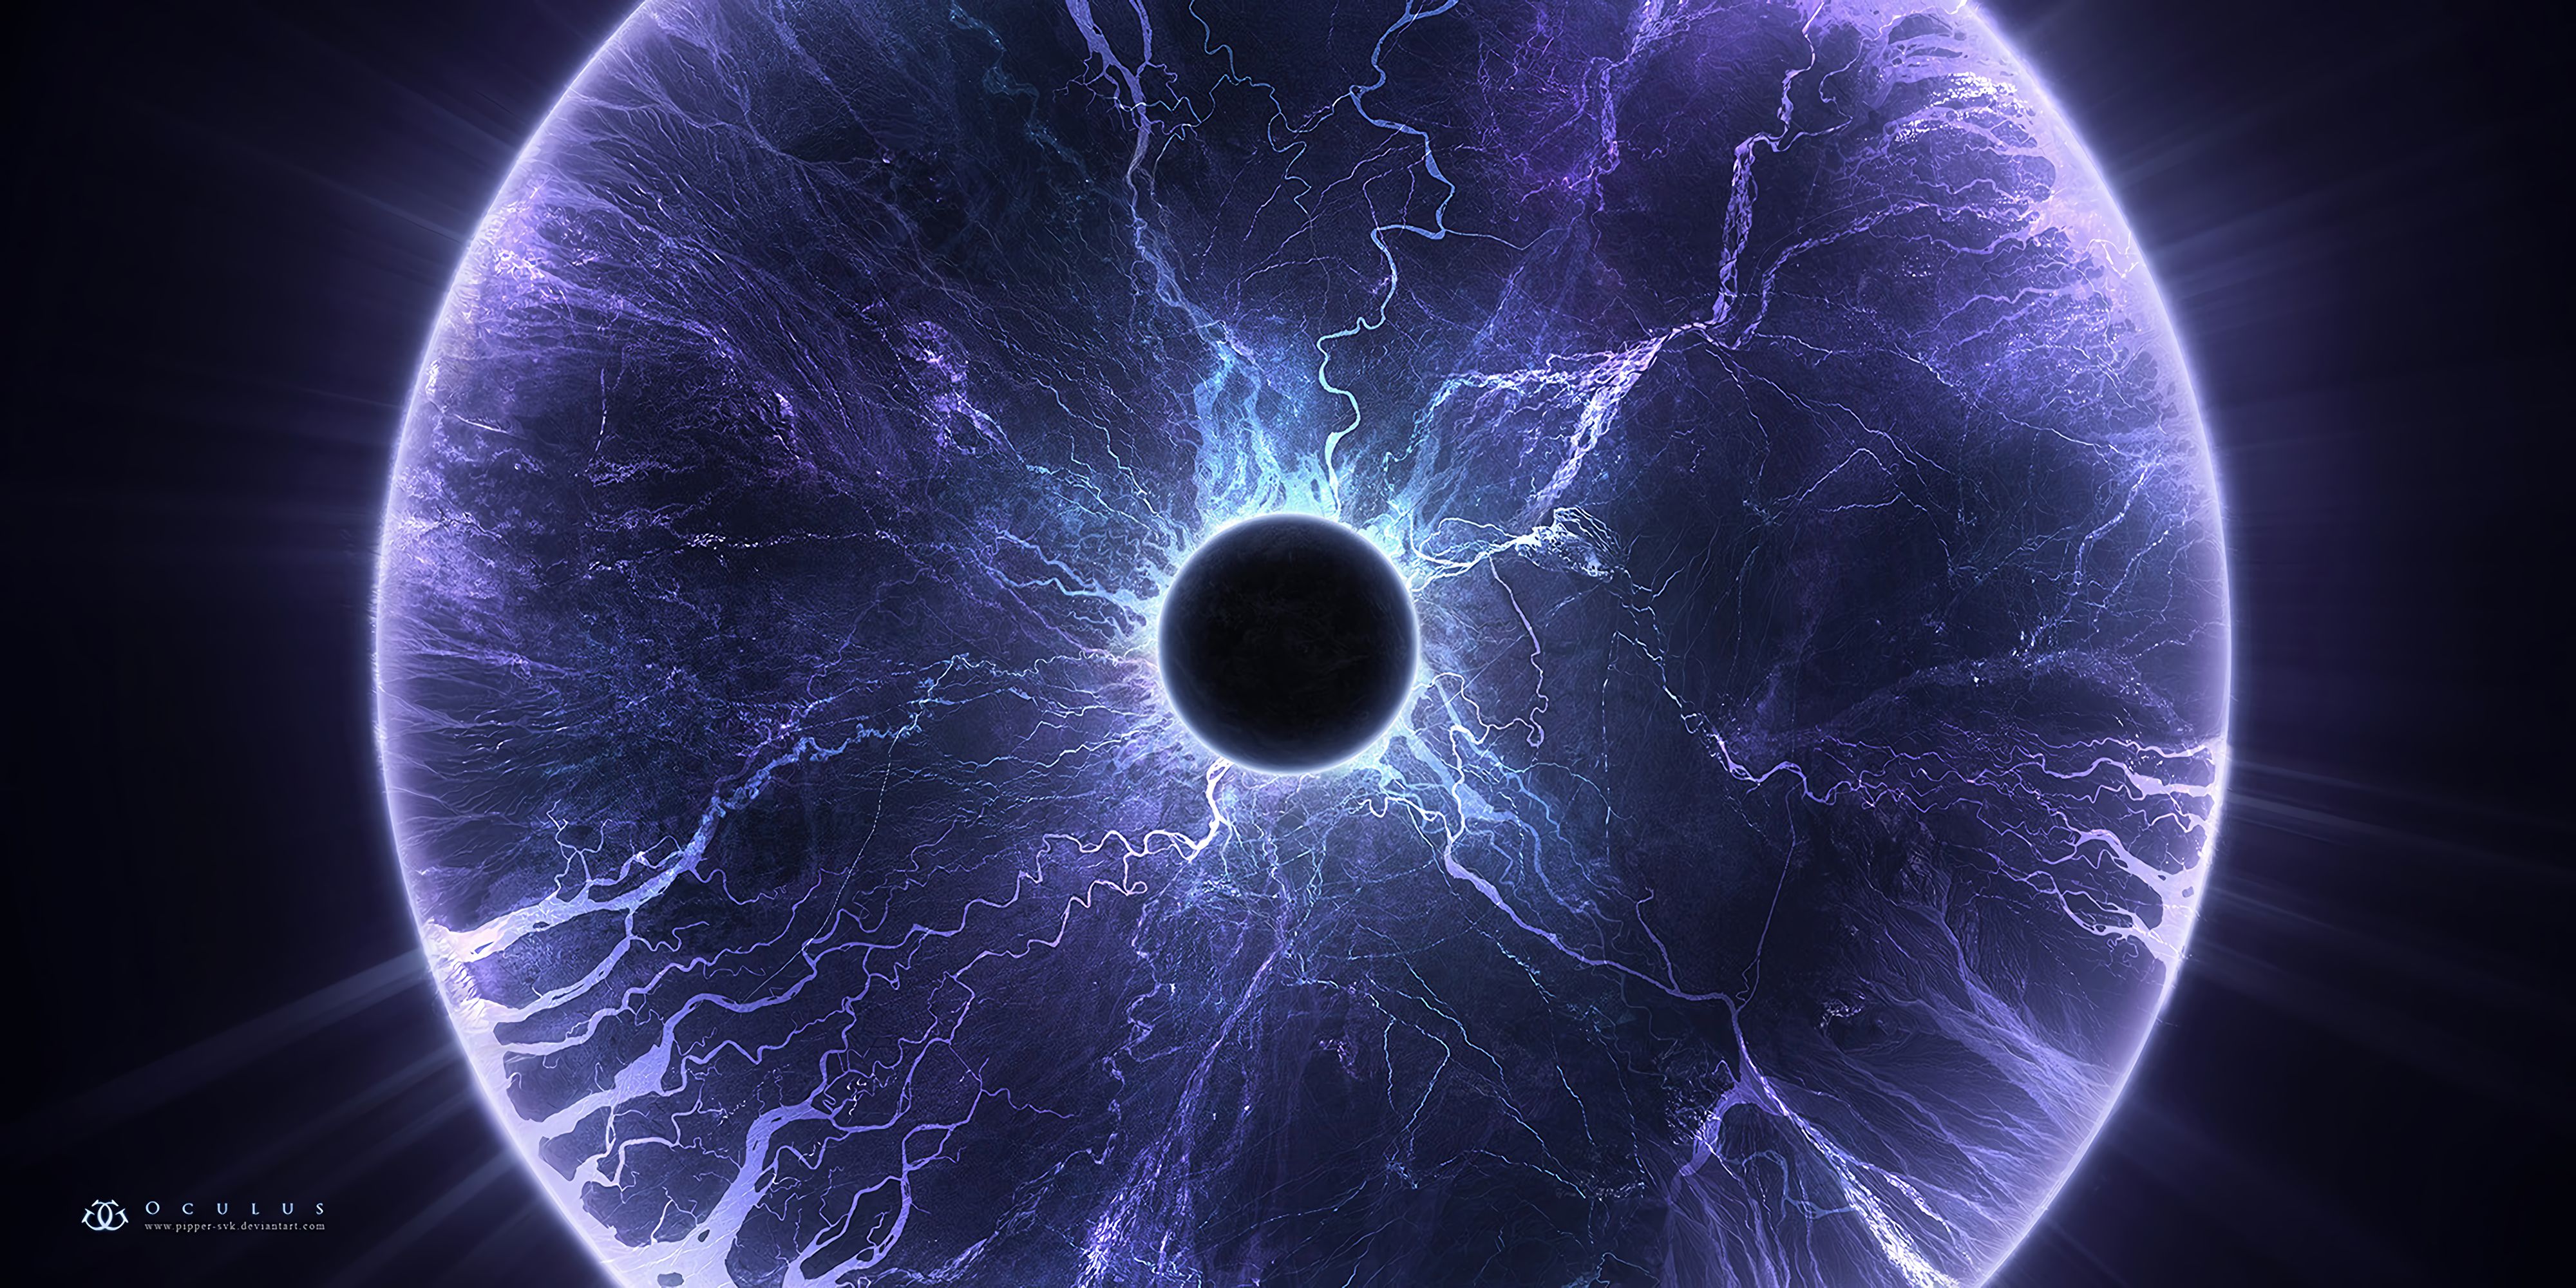 133702 download wallpaper universe, glow, lightning, violet, halo, purple, planet, eclipse screensavers and pictures for free